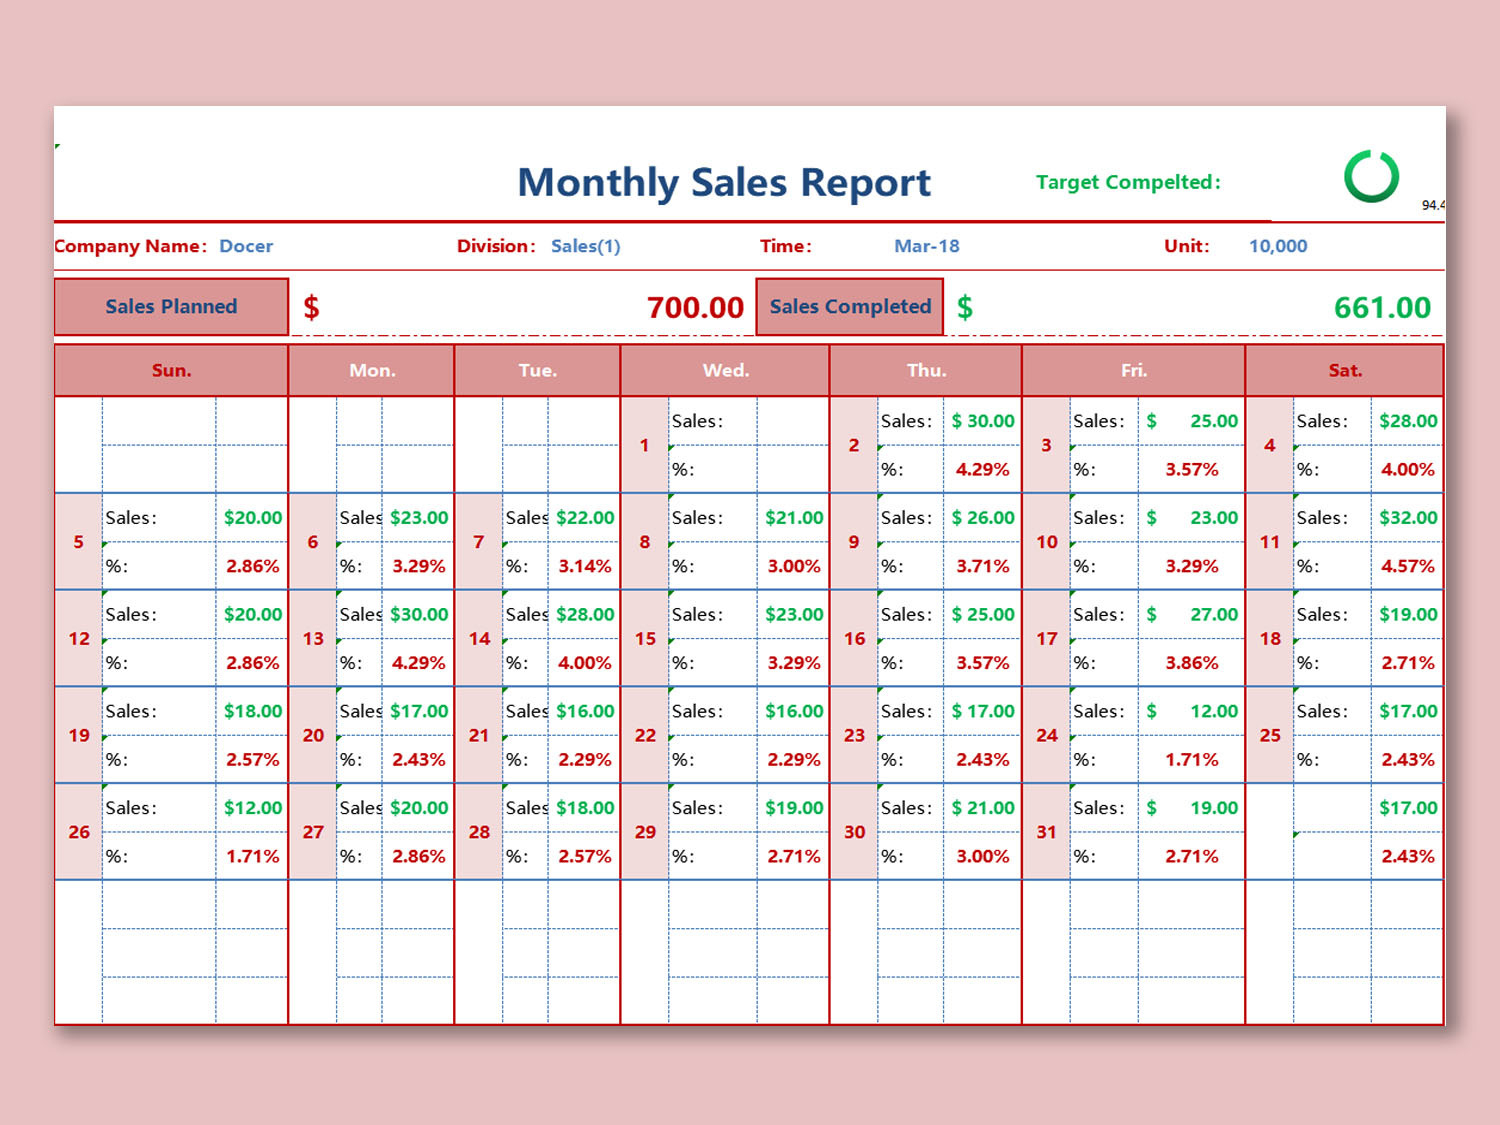 EXCEL of Monthly Sales Report